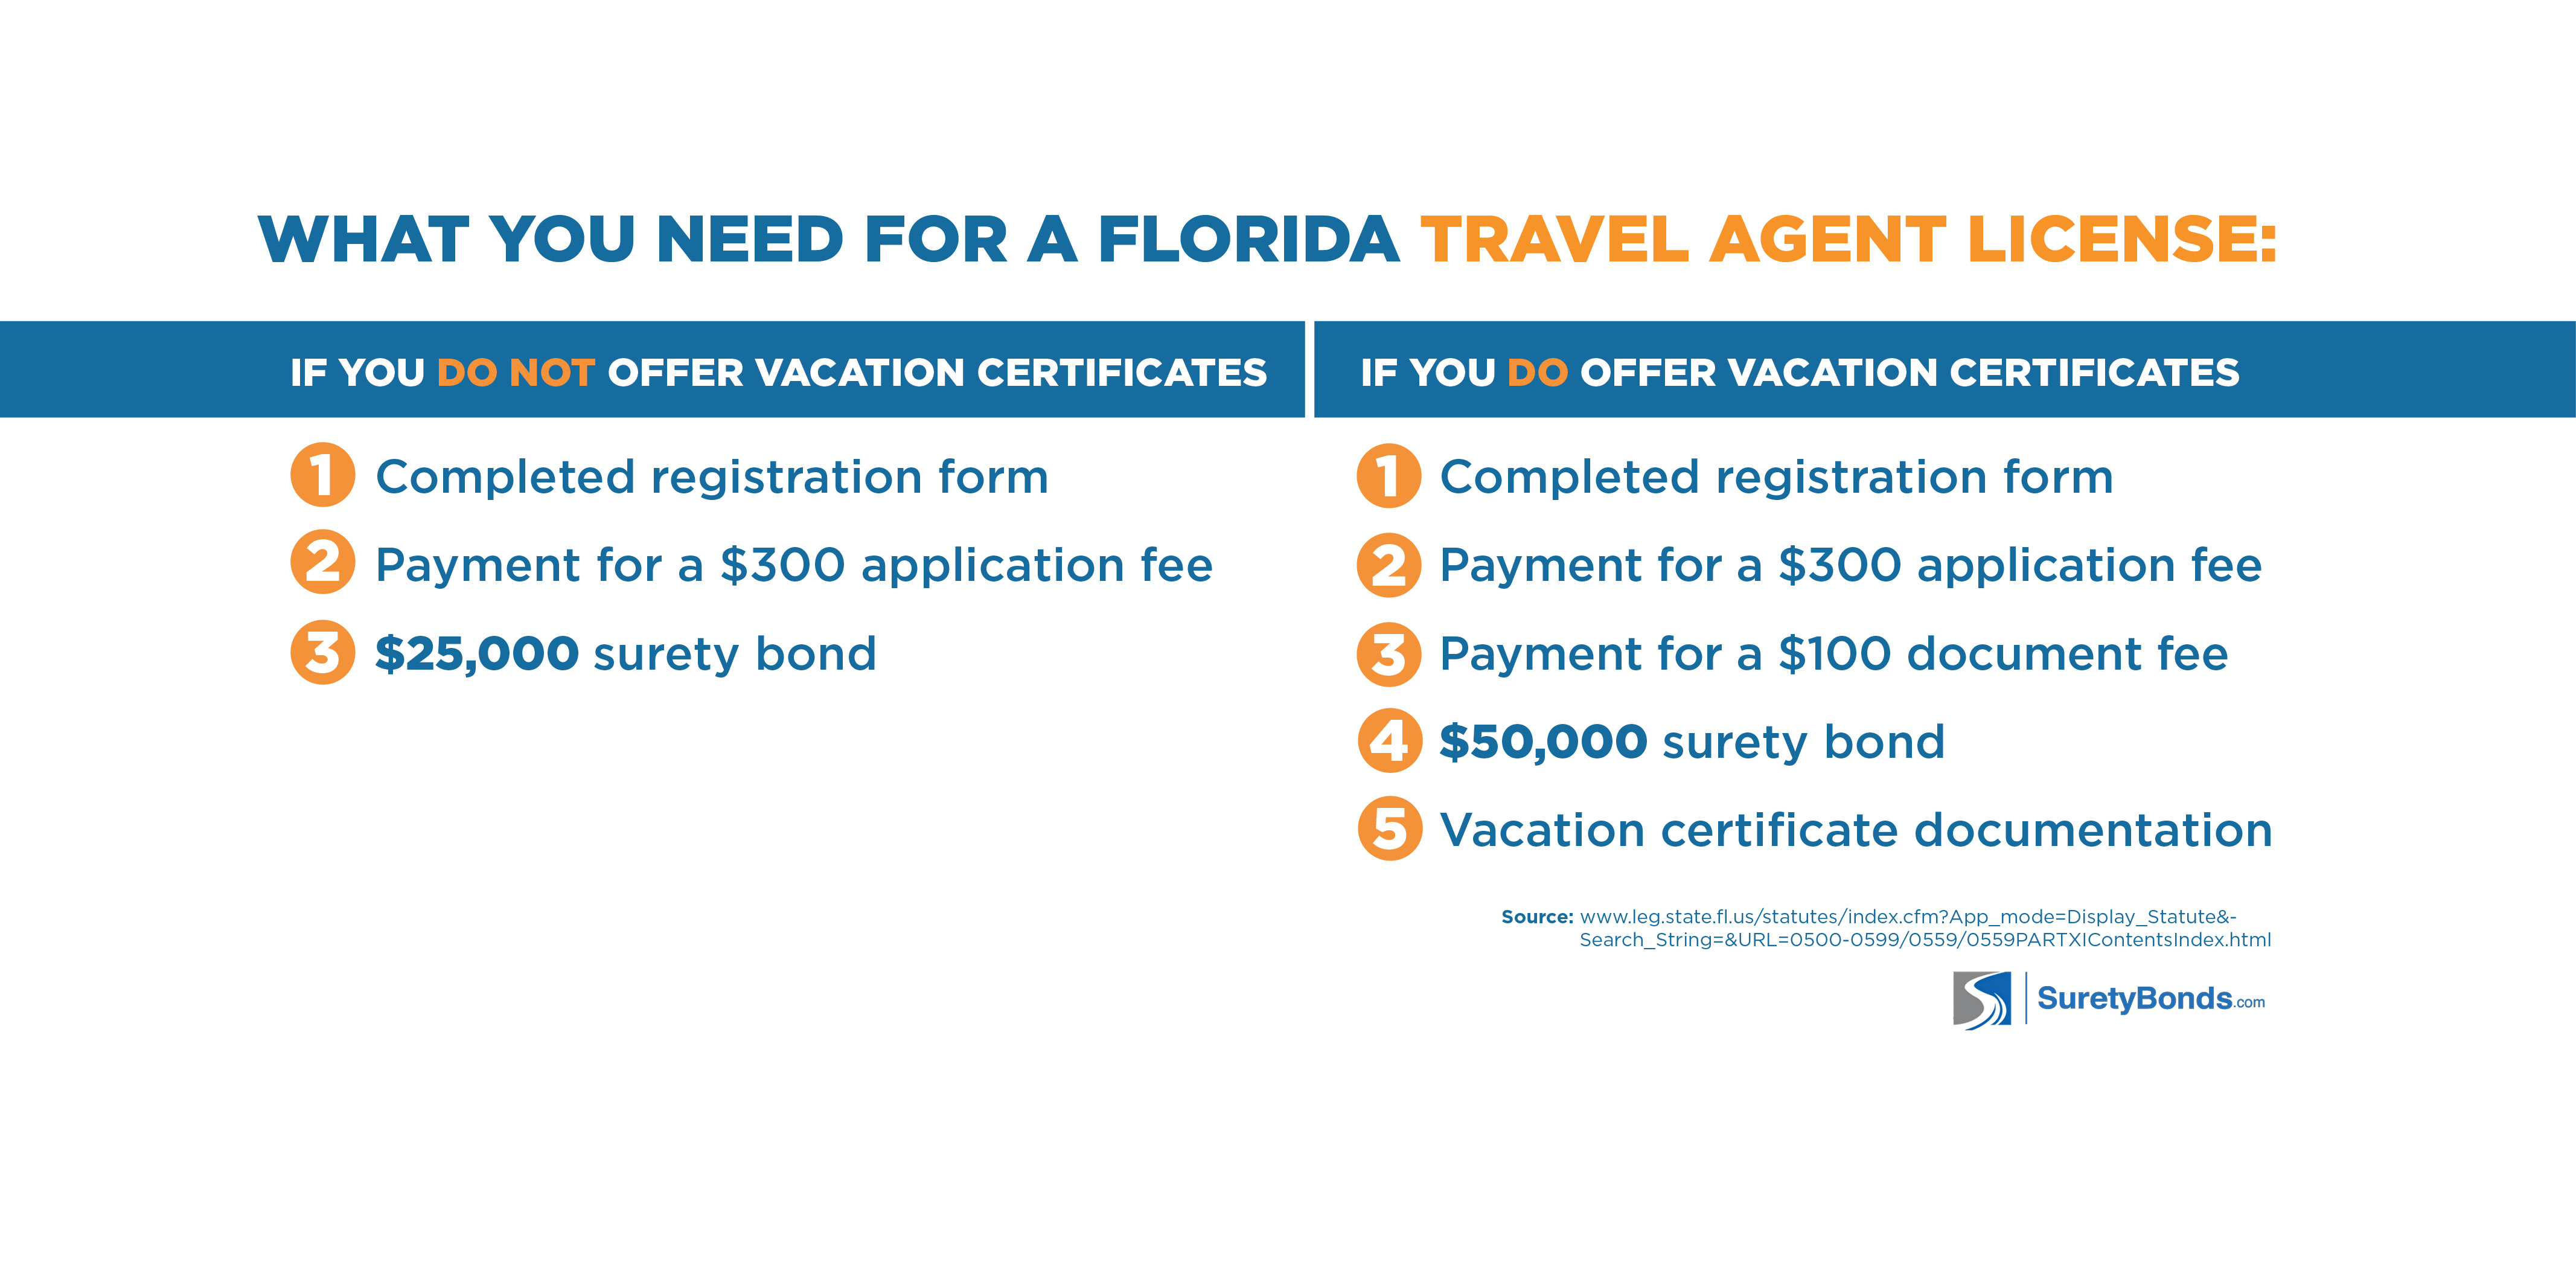 What you need for a Florida Travel Agent License